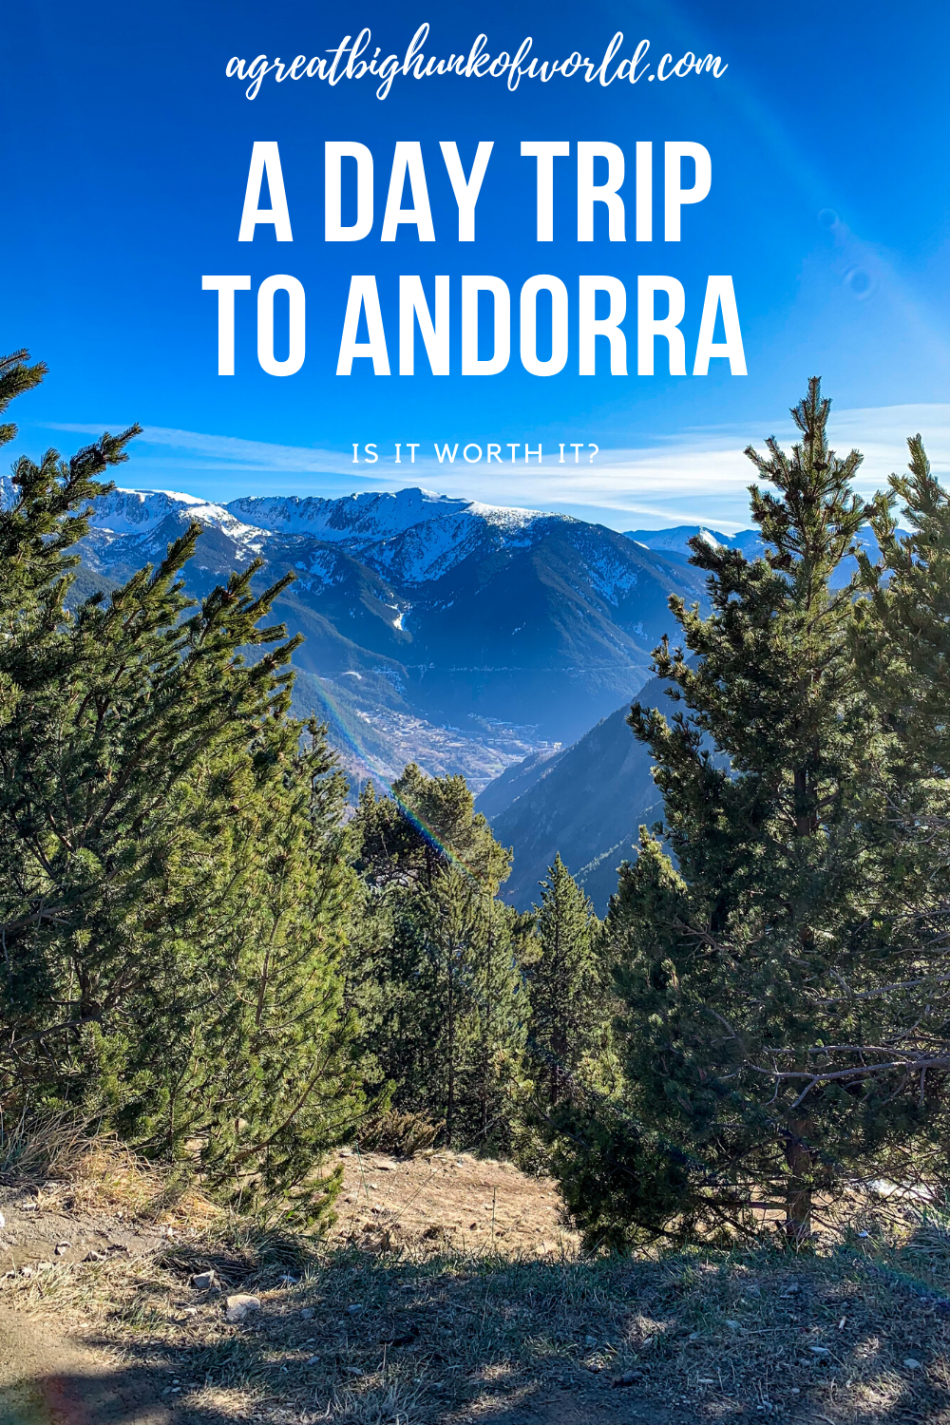 A Day Trip to Andorra